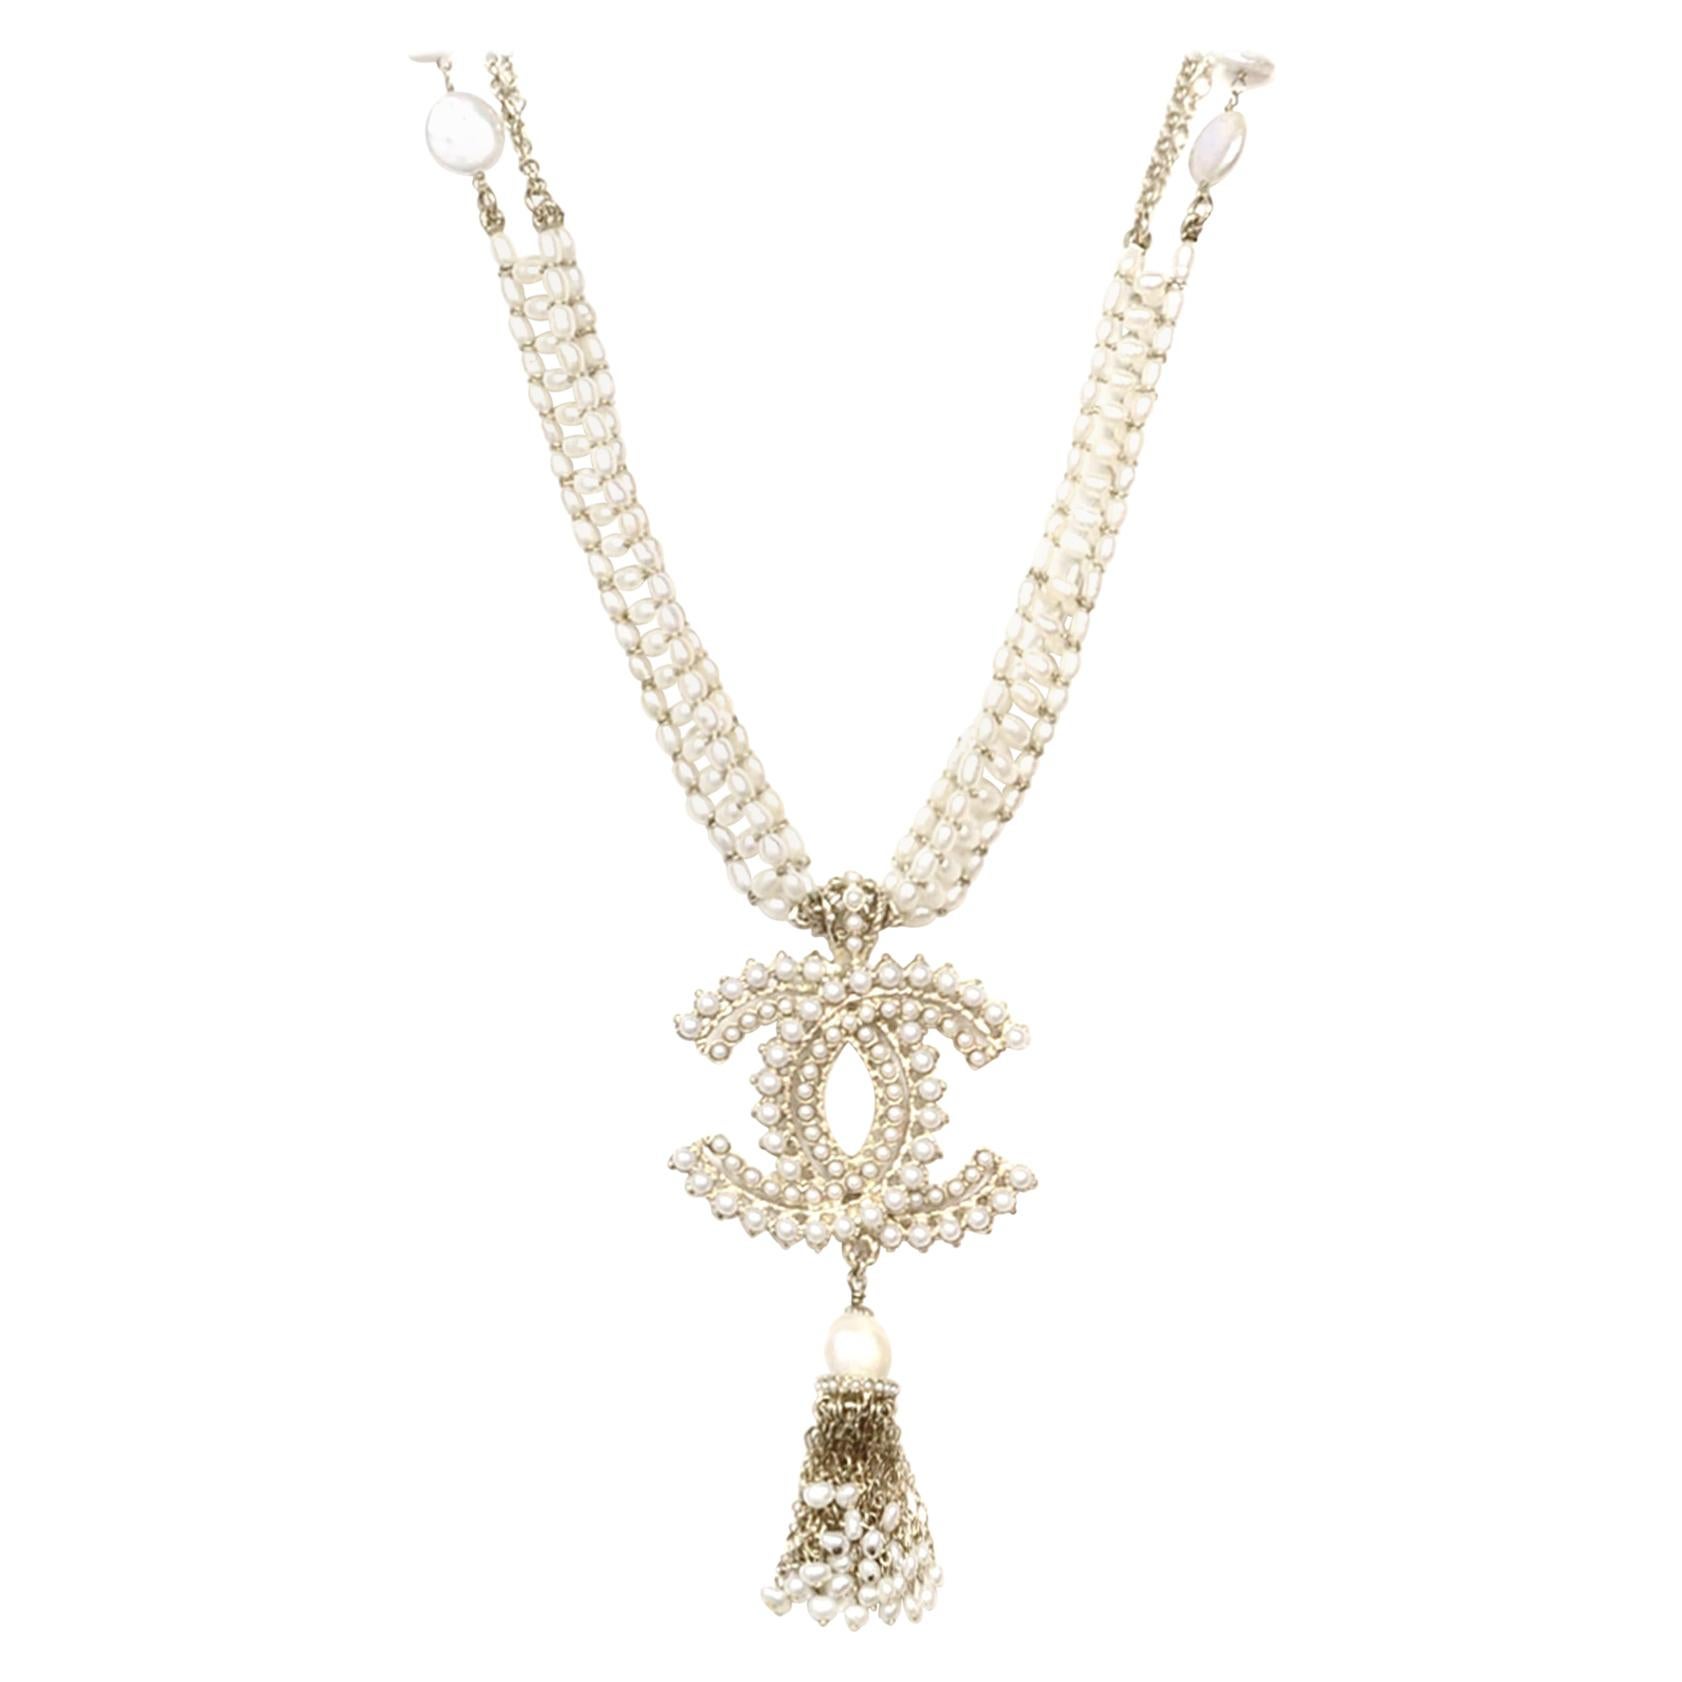 Chanel 2018 Fresh Water Pearl CC Tassel Adjustable Necklace rt. $2, 675